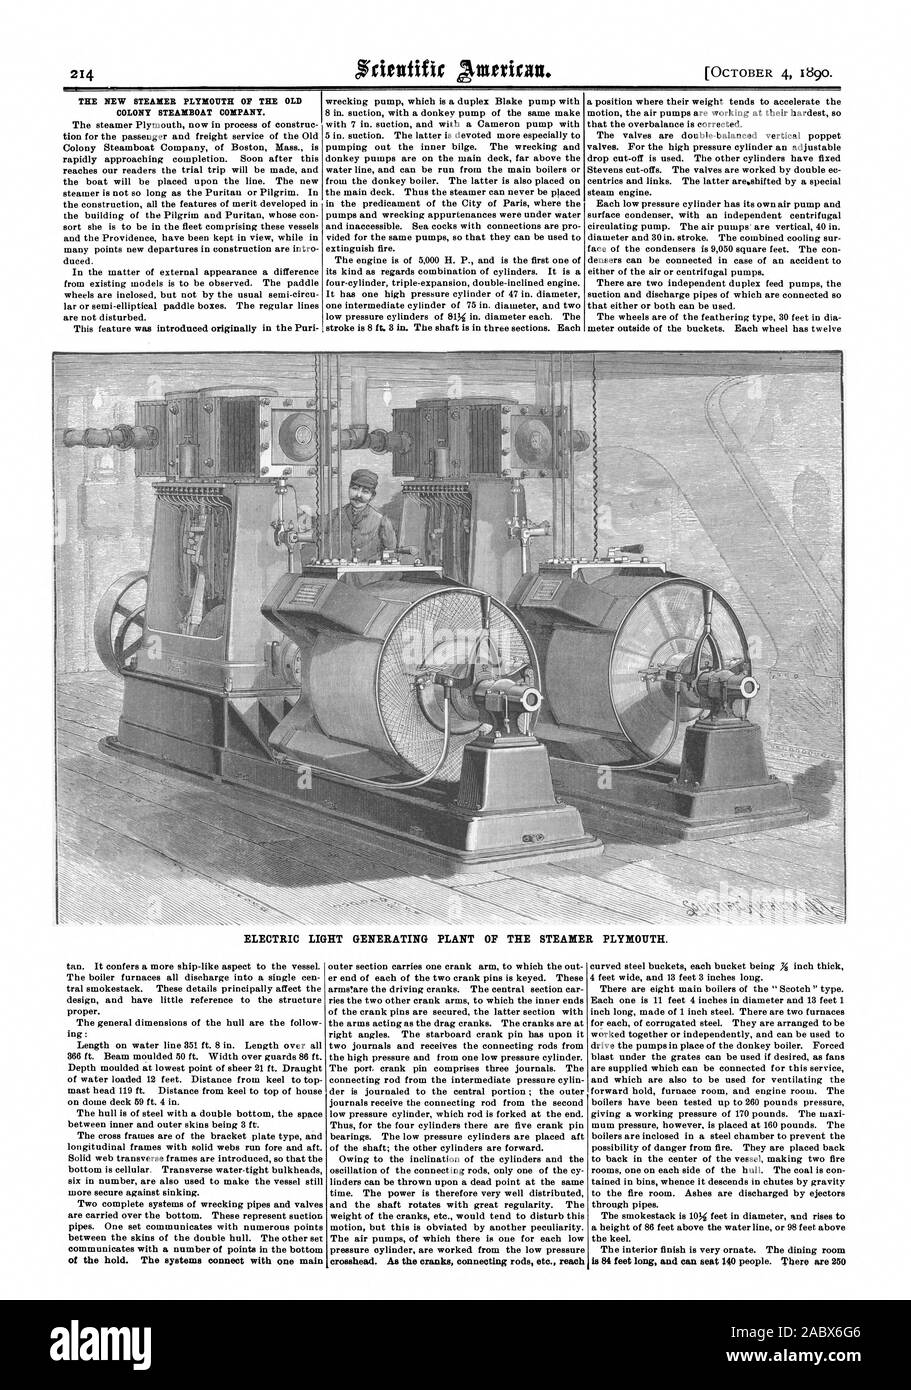 THE NEW STEAMER PLYMOUTH OF THE OLD COLONY STEAMBOAT COMPANY. ELECTRIC LIGHT GENERATING PLANT OF THE STEAMER PLYMOUTH. of the hold. The systems connect with one main crosshead. As the cranks connecting rods etc. reach, scientific american, 1890-10-04 Stock Photo